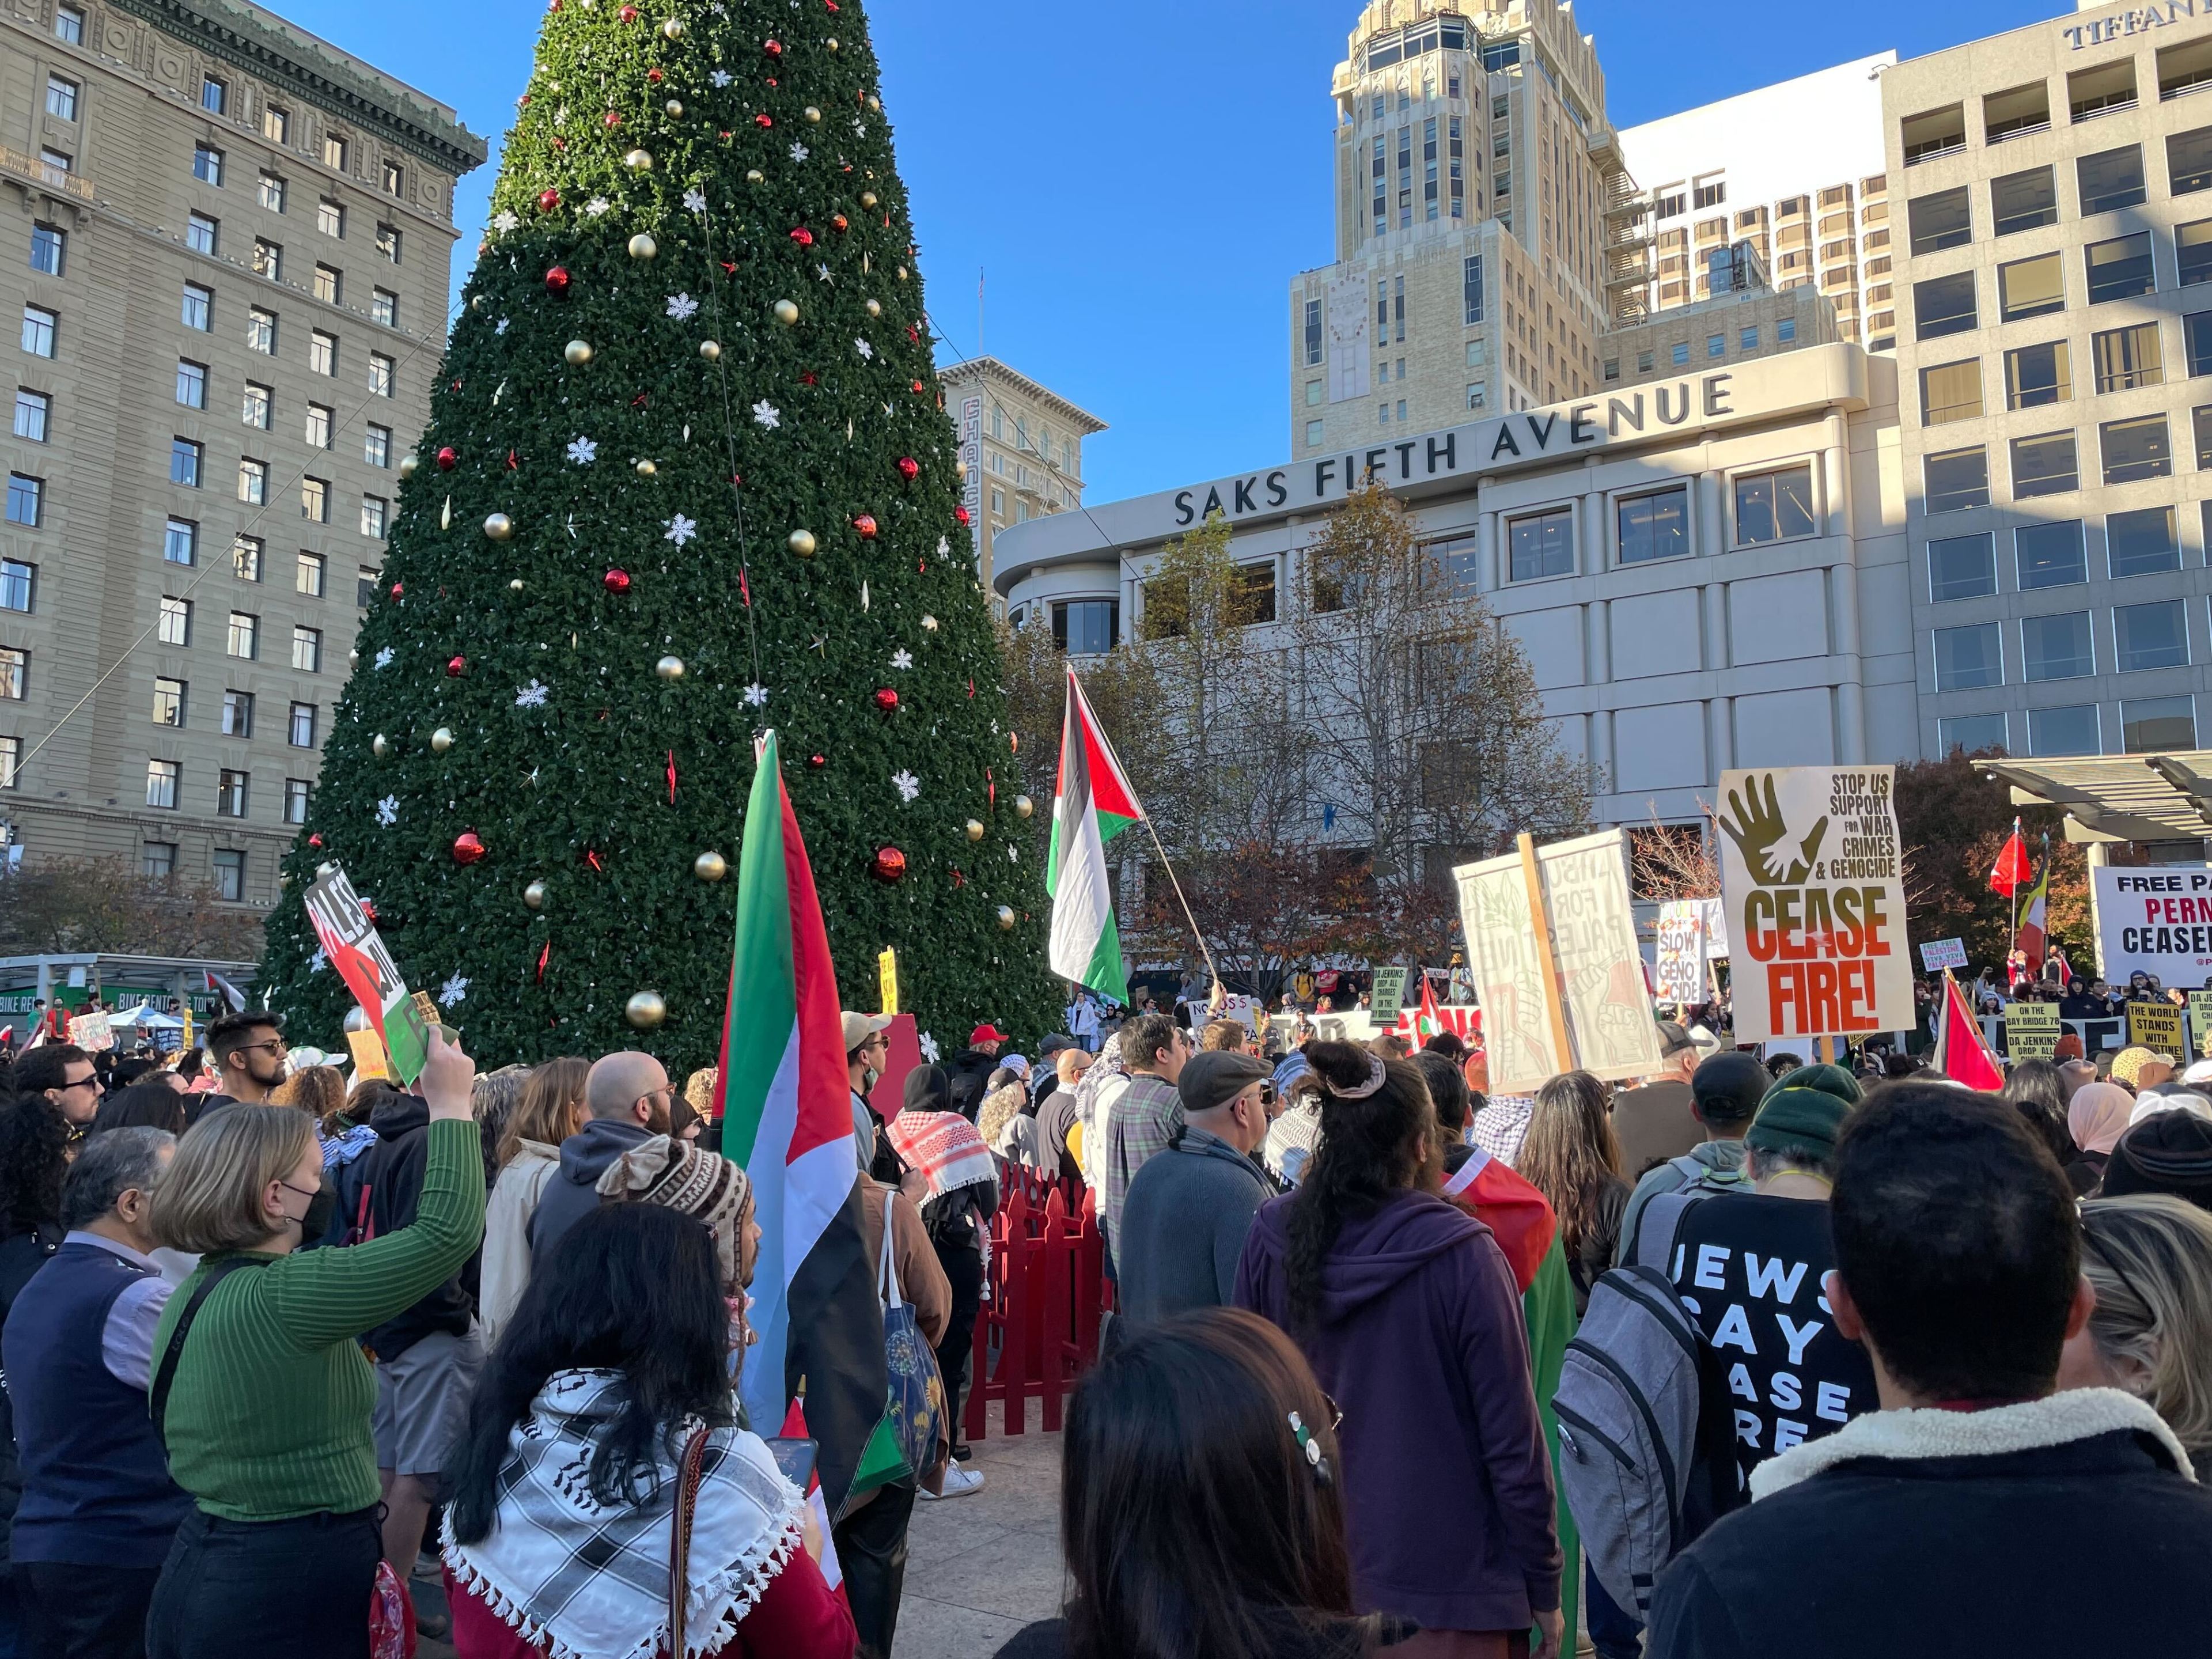 A crowd with flags and signs gathers by a large, decorated Christmas tree in an urban square.